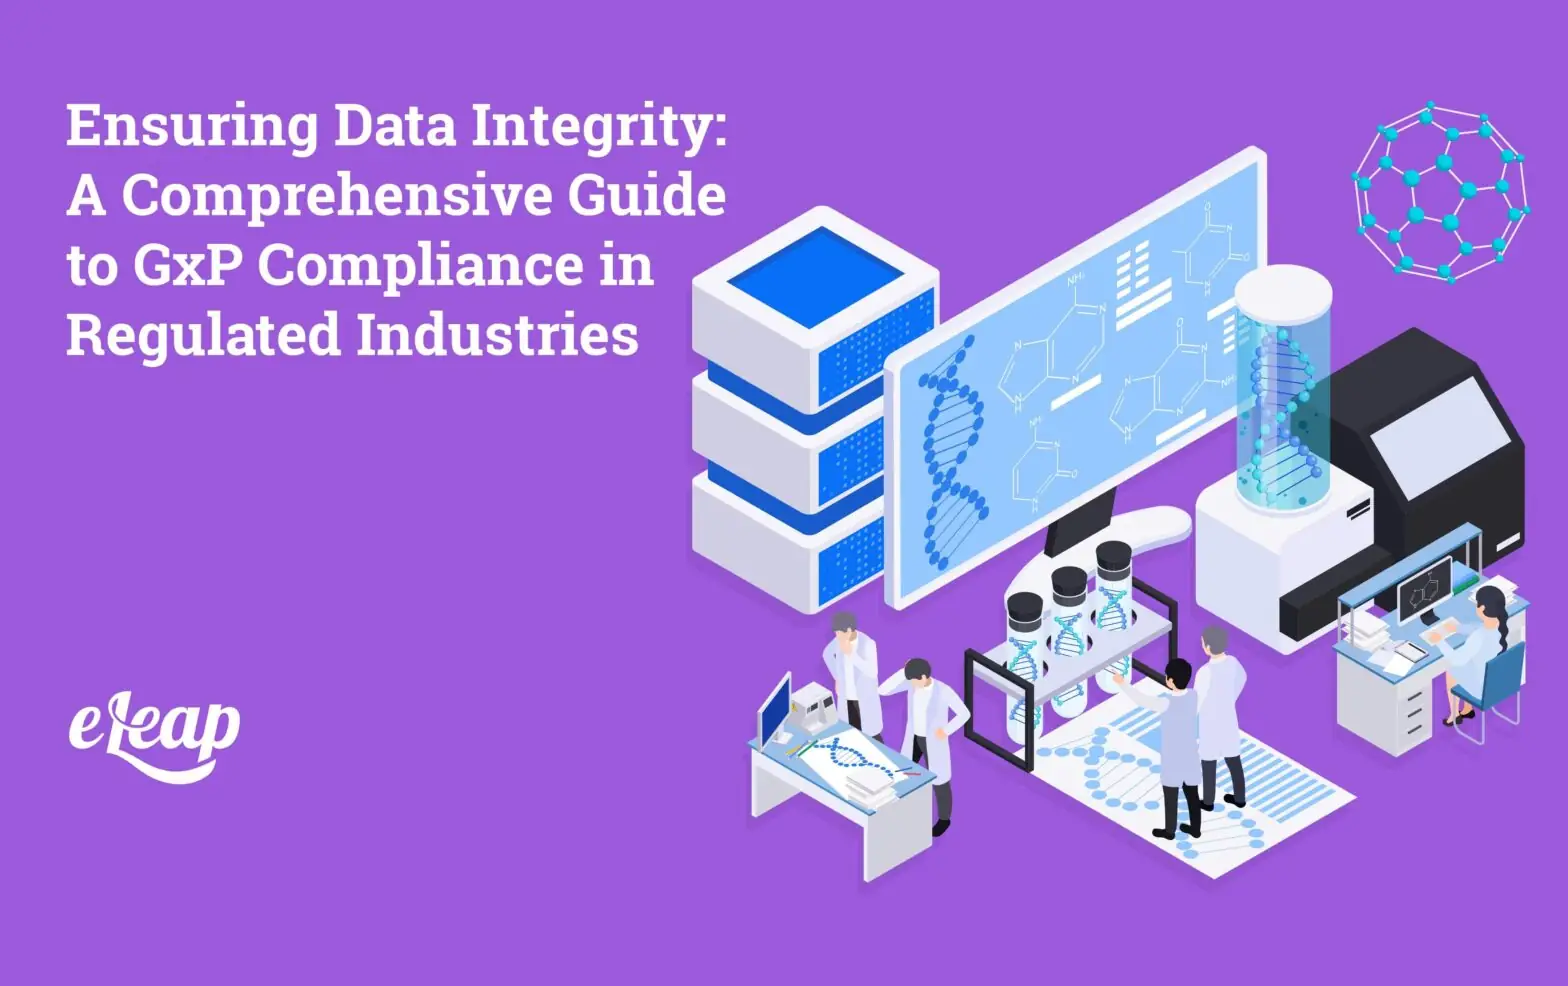 Ensuring Data Integrity: A Comprehensive Guide to GxP Compliance in Regulated Industries